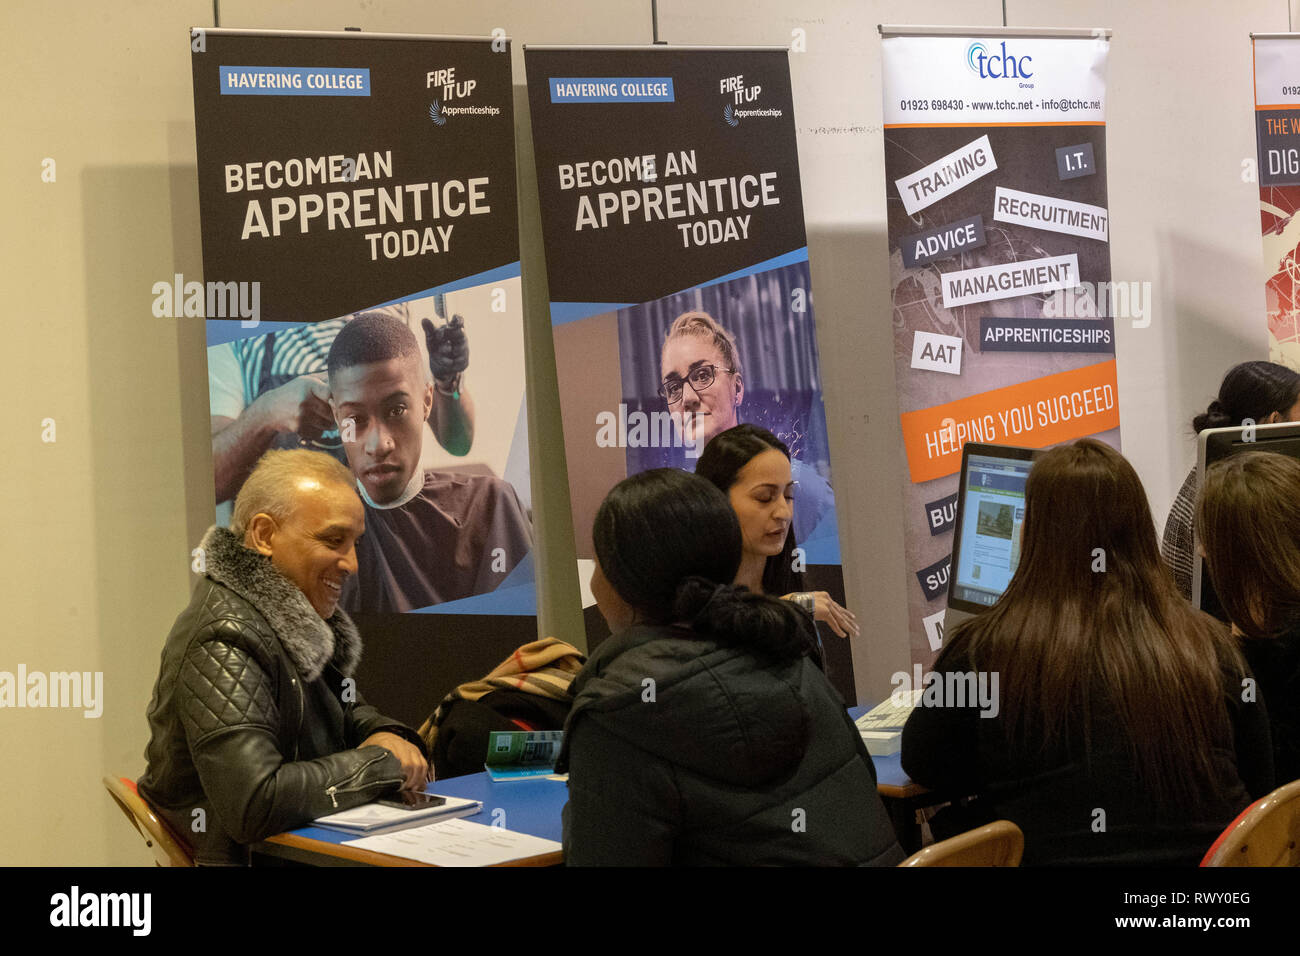 Brentwood, Essex, UK. 7th March 2019. Pop-up Shop for Apprenticeships shop during National Apprenticeship Week 4th-9th March 2019 in the Baytree Center Brentwood Essex Credit: Ian Davidson/Alamy Live News Stock Photo